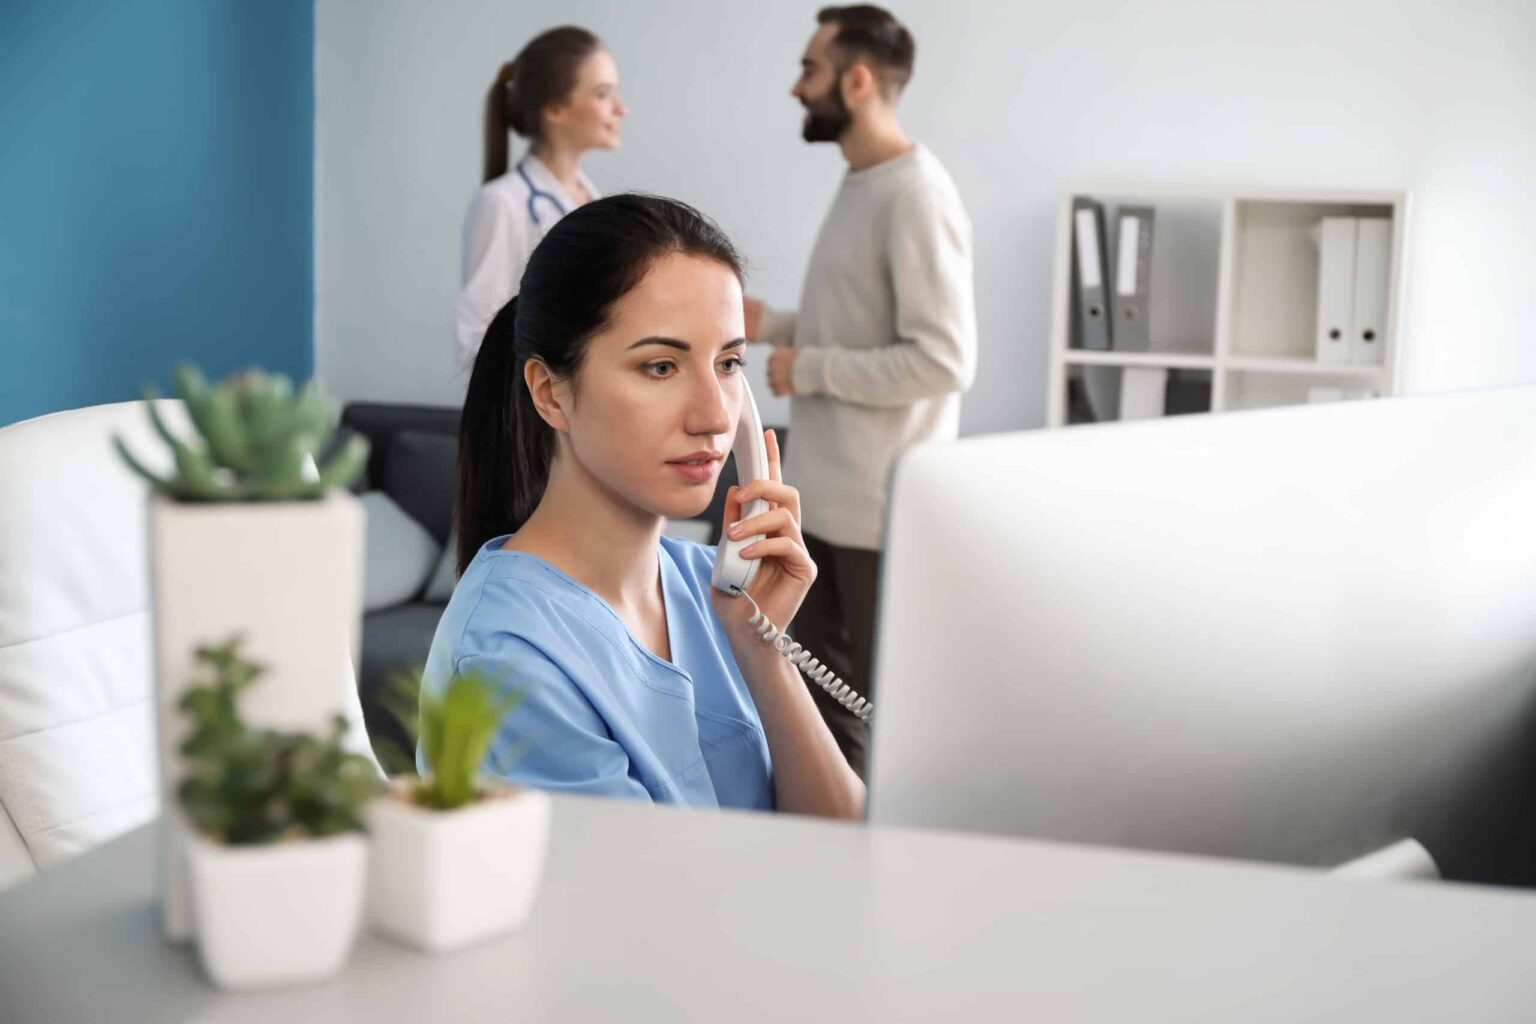 RingRx helps healthcare providers stop spam and block robocalls